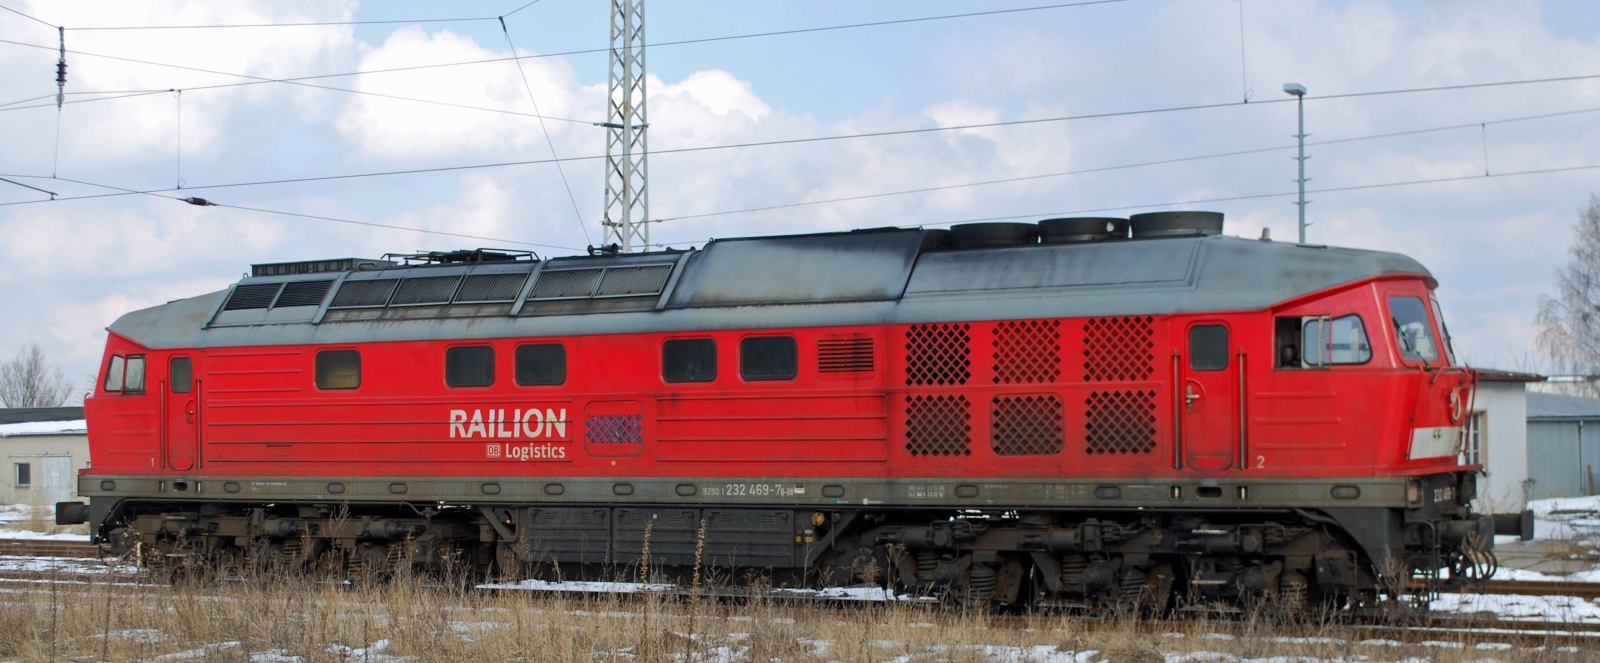 232 469 in Railion livery in March 2013